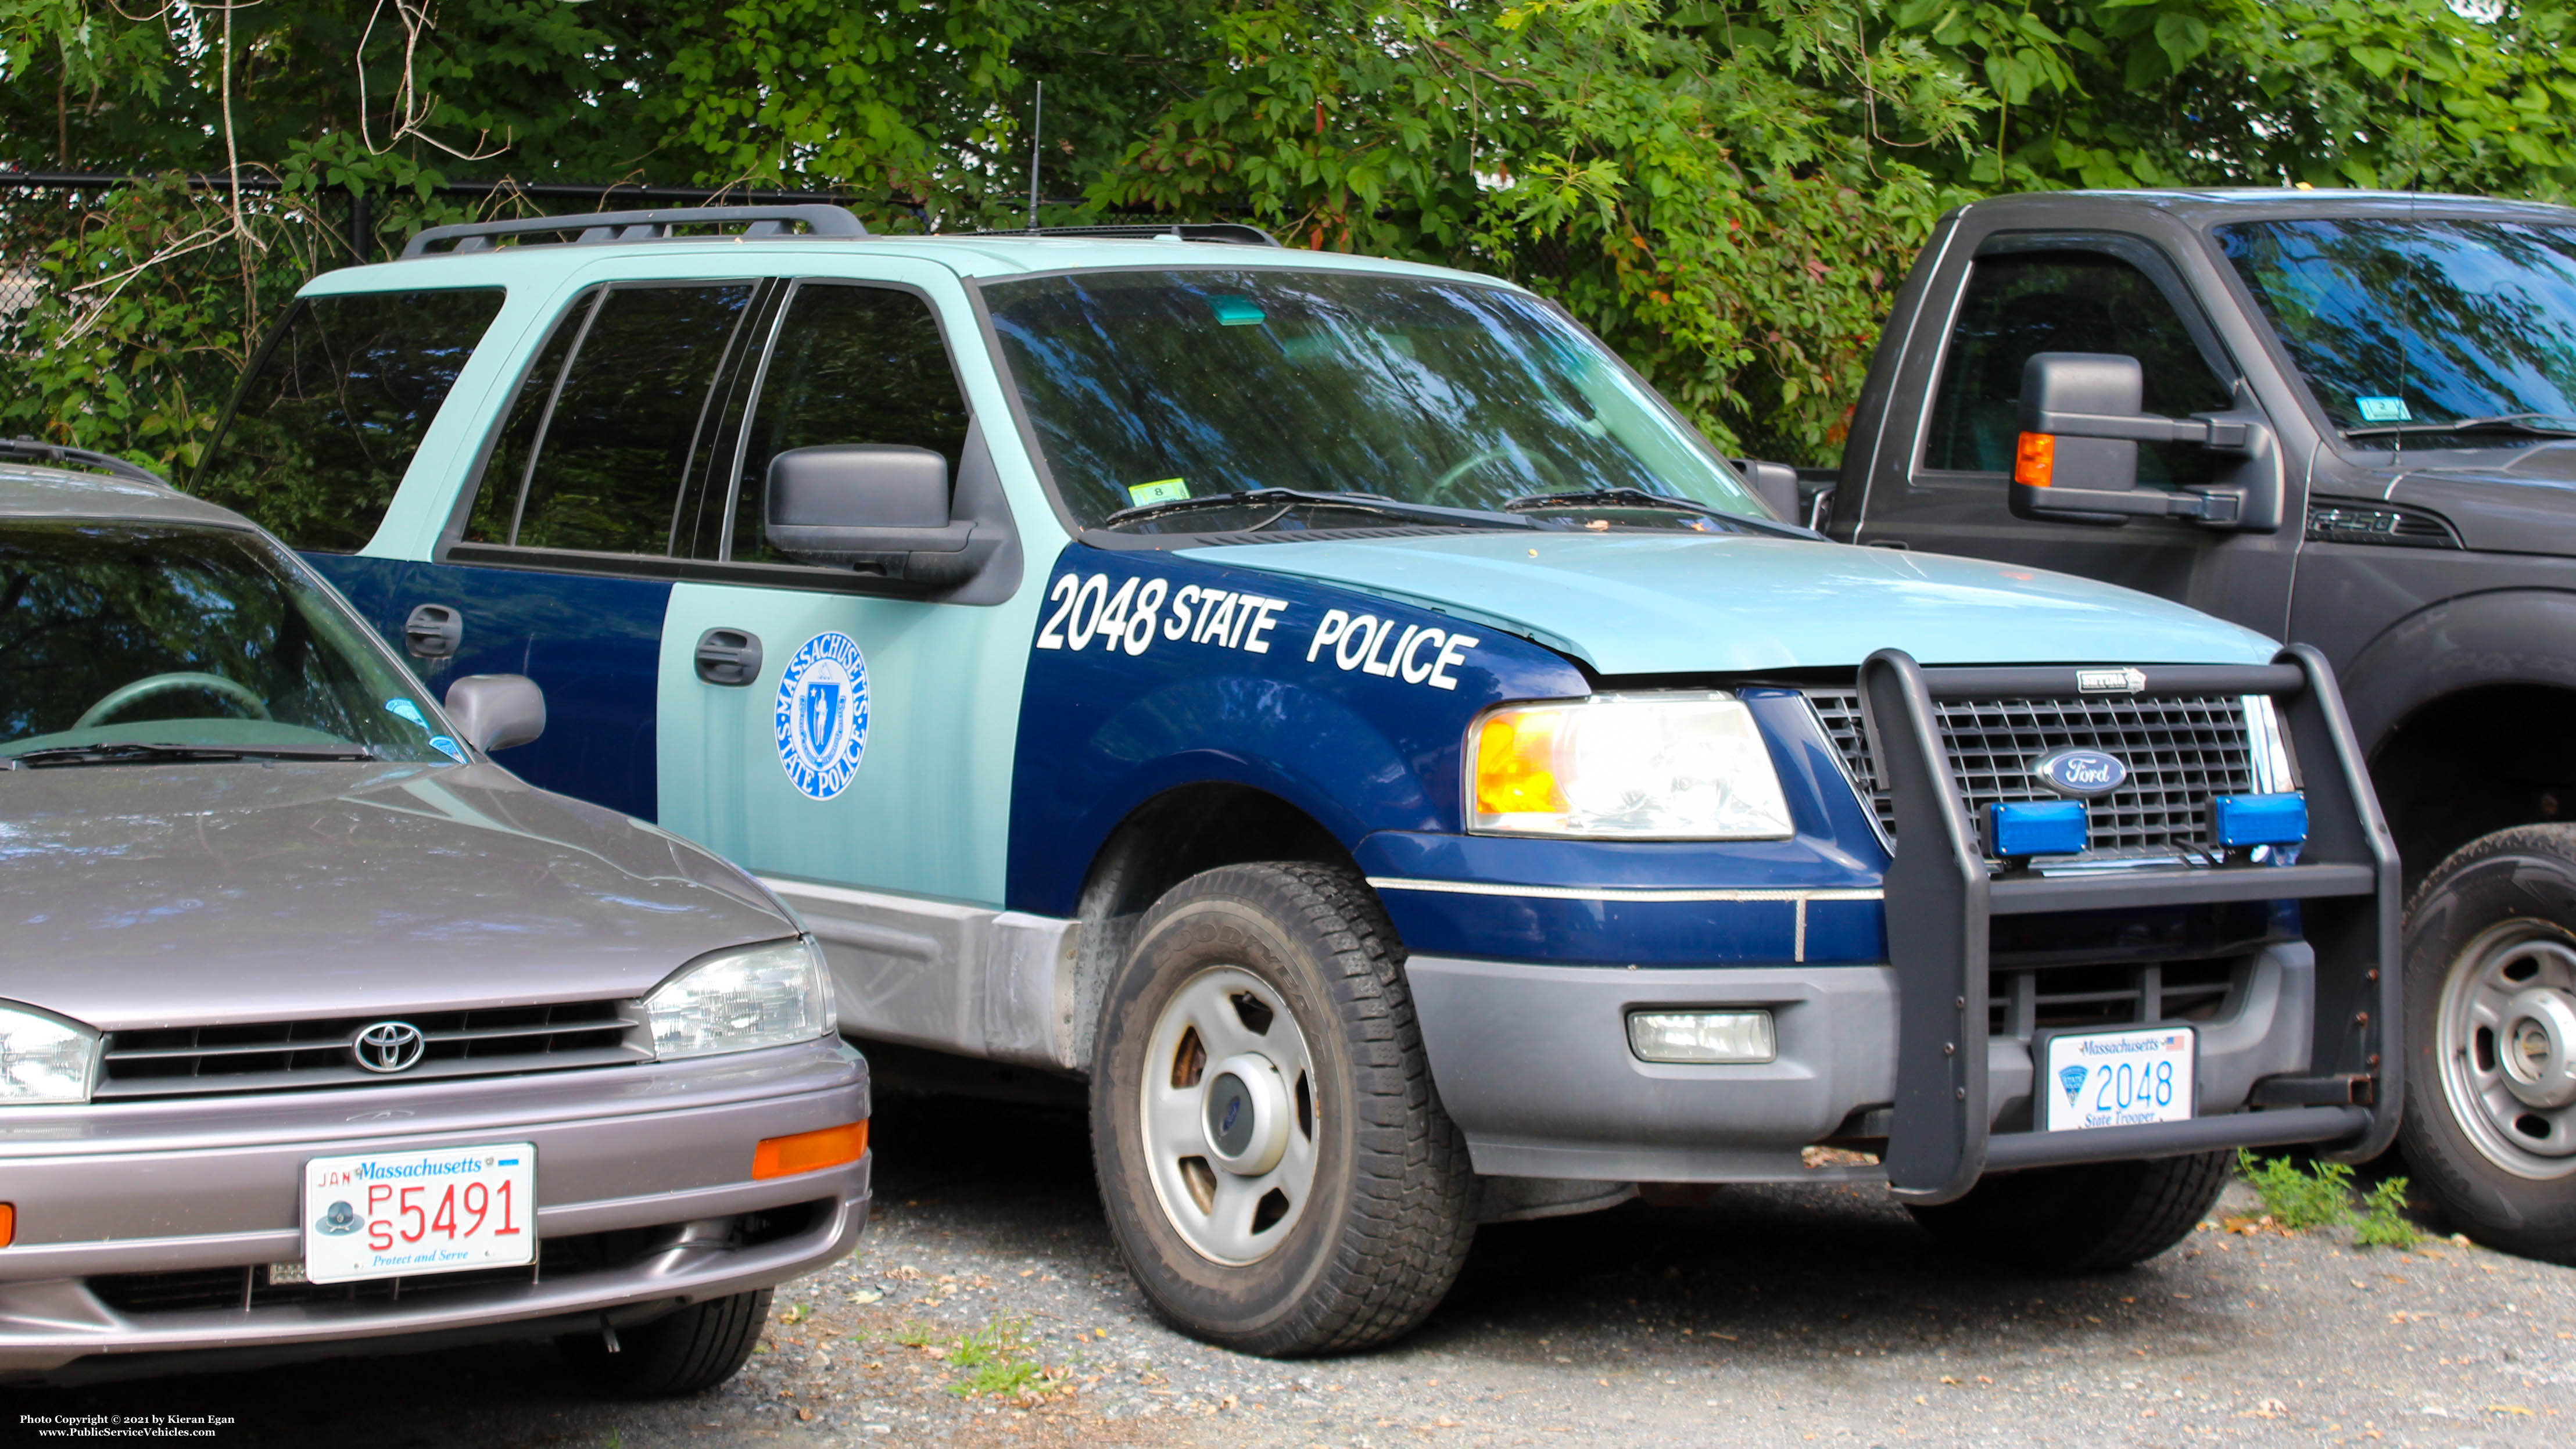 A photo  of Massachusetts State Police
            Cruiser 2048, a 2006 Ford Expedition             taken by Kieran Egan